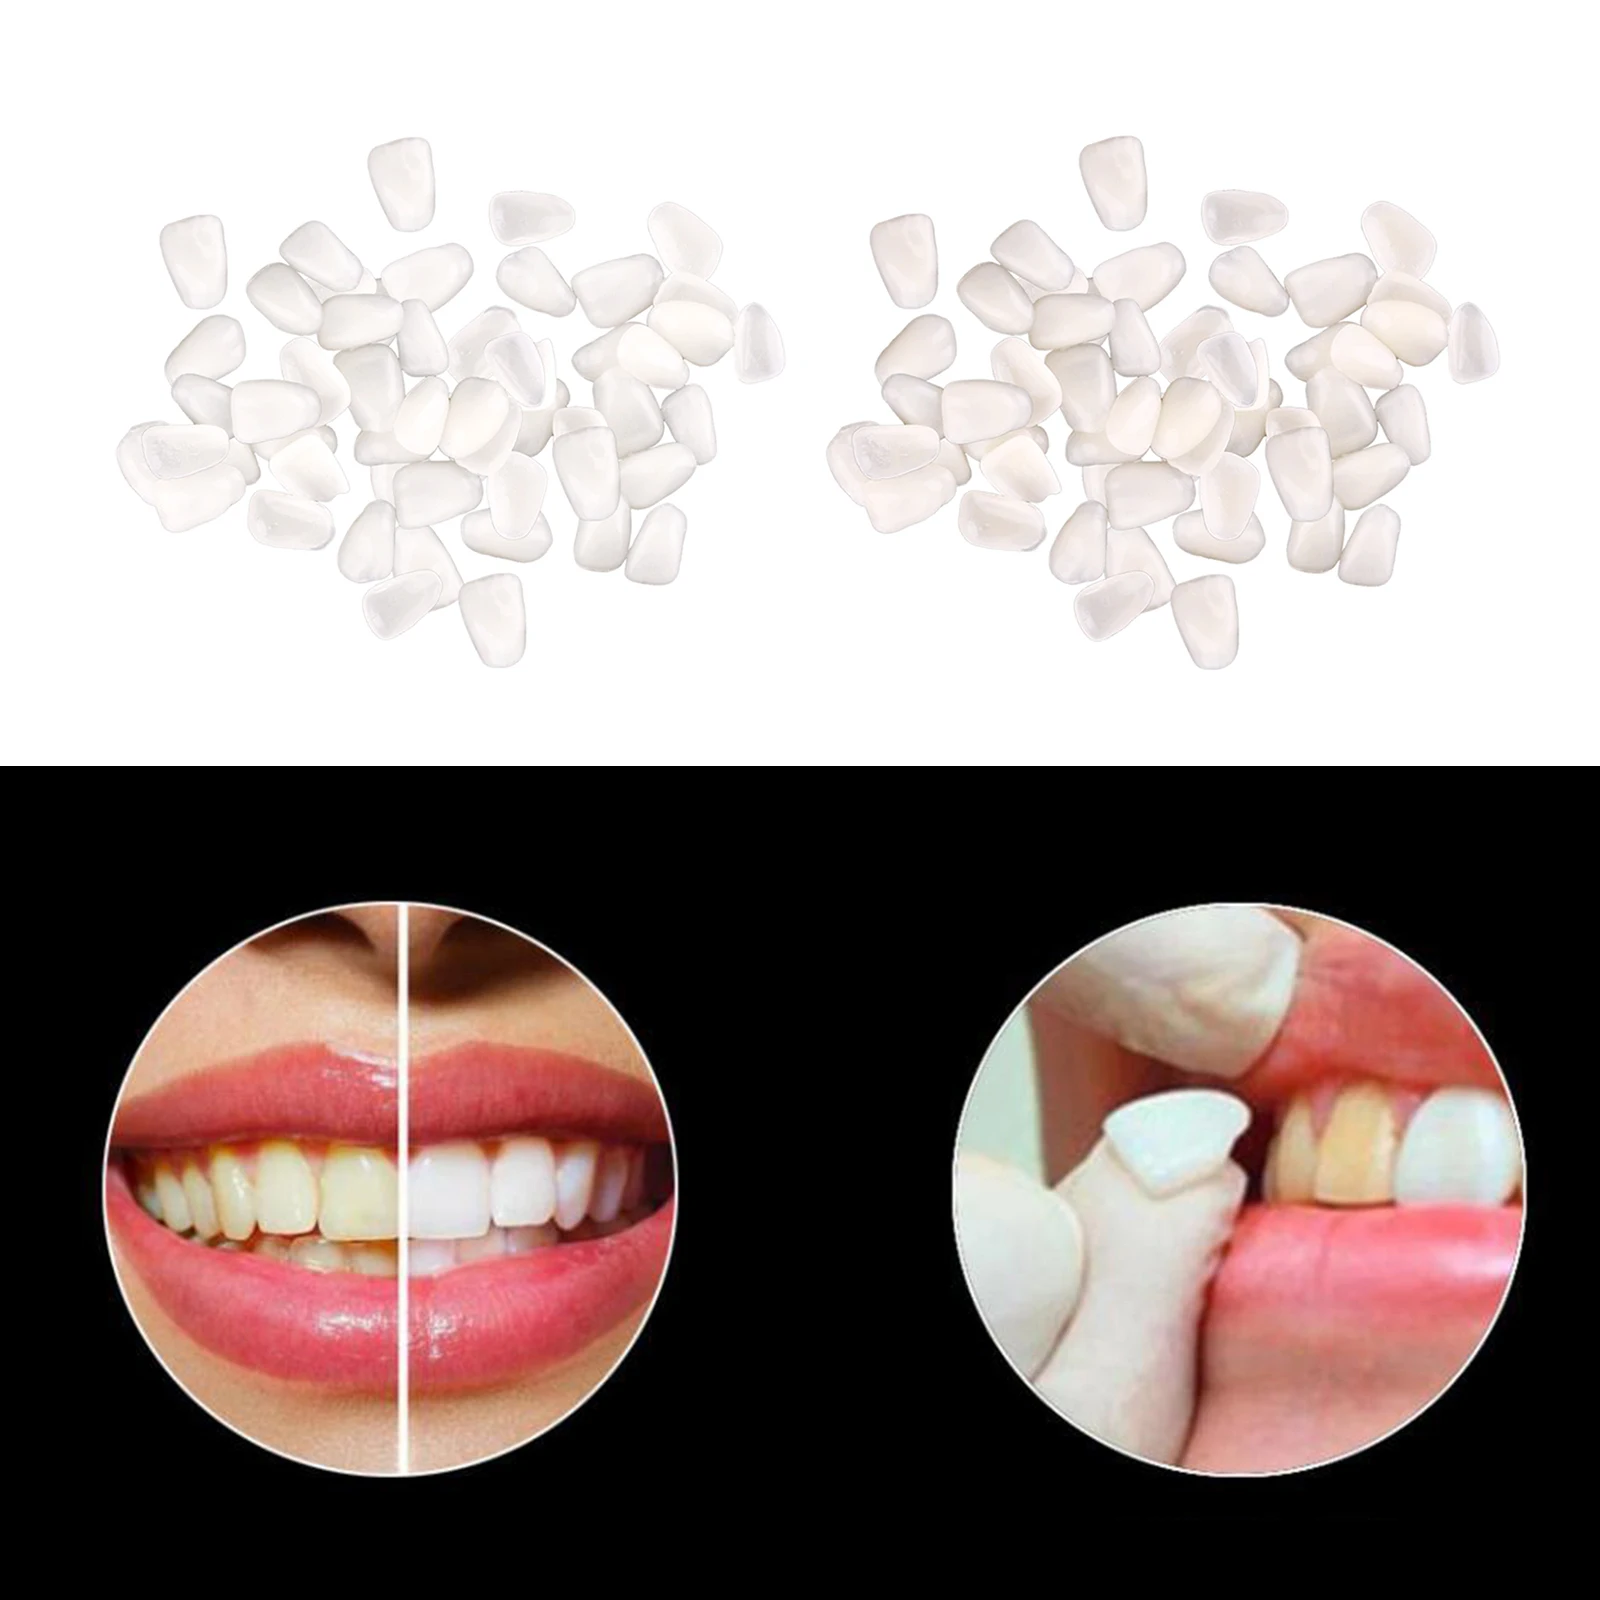 Teeth Tooth Temporary Crown Veneers Anterior Mixed Type Dentist Products